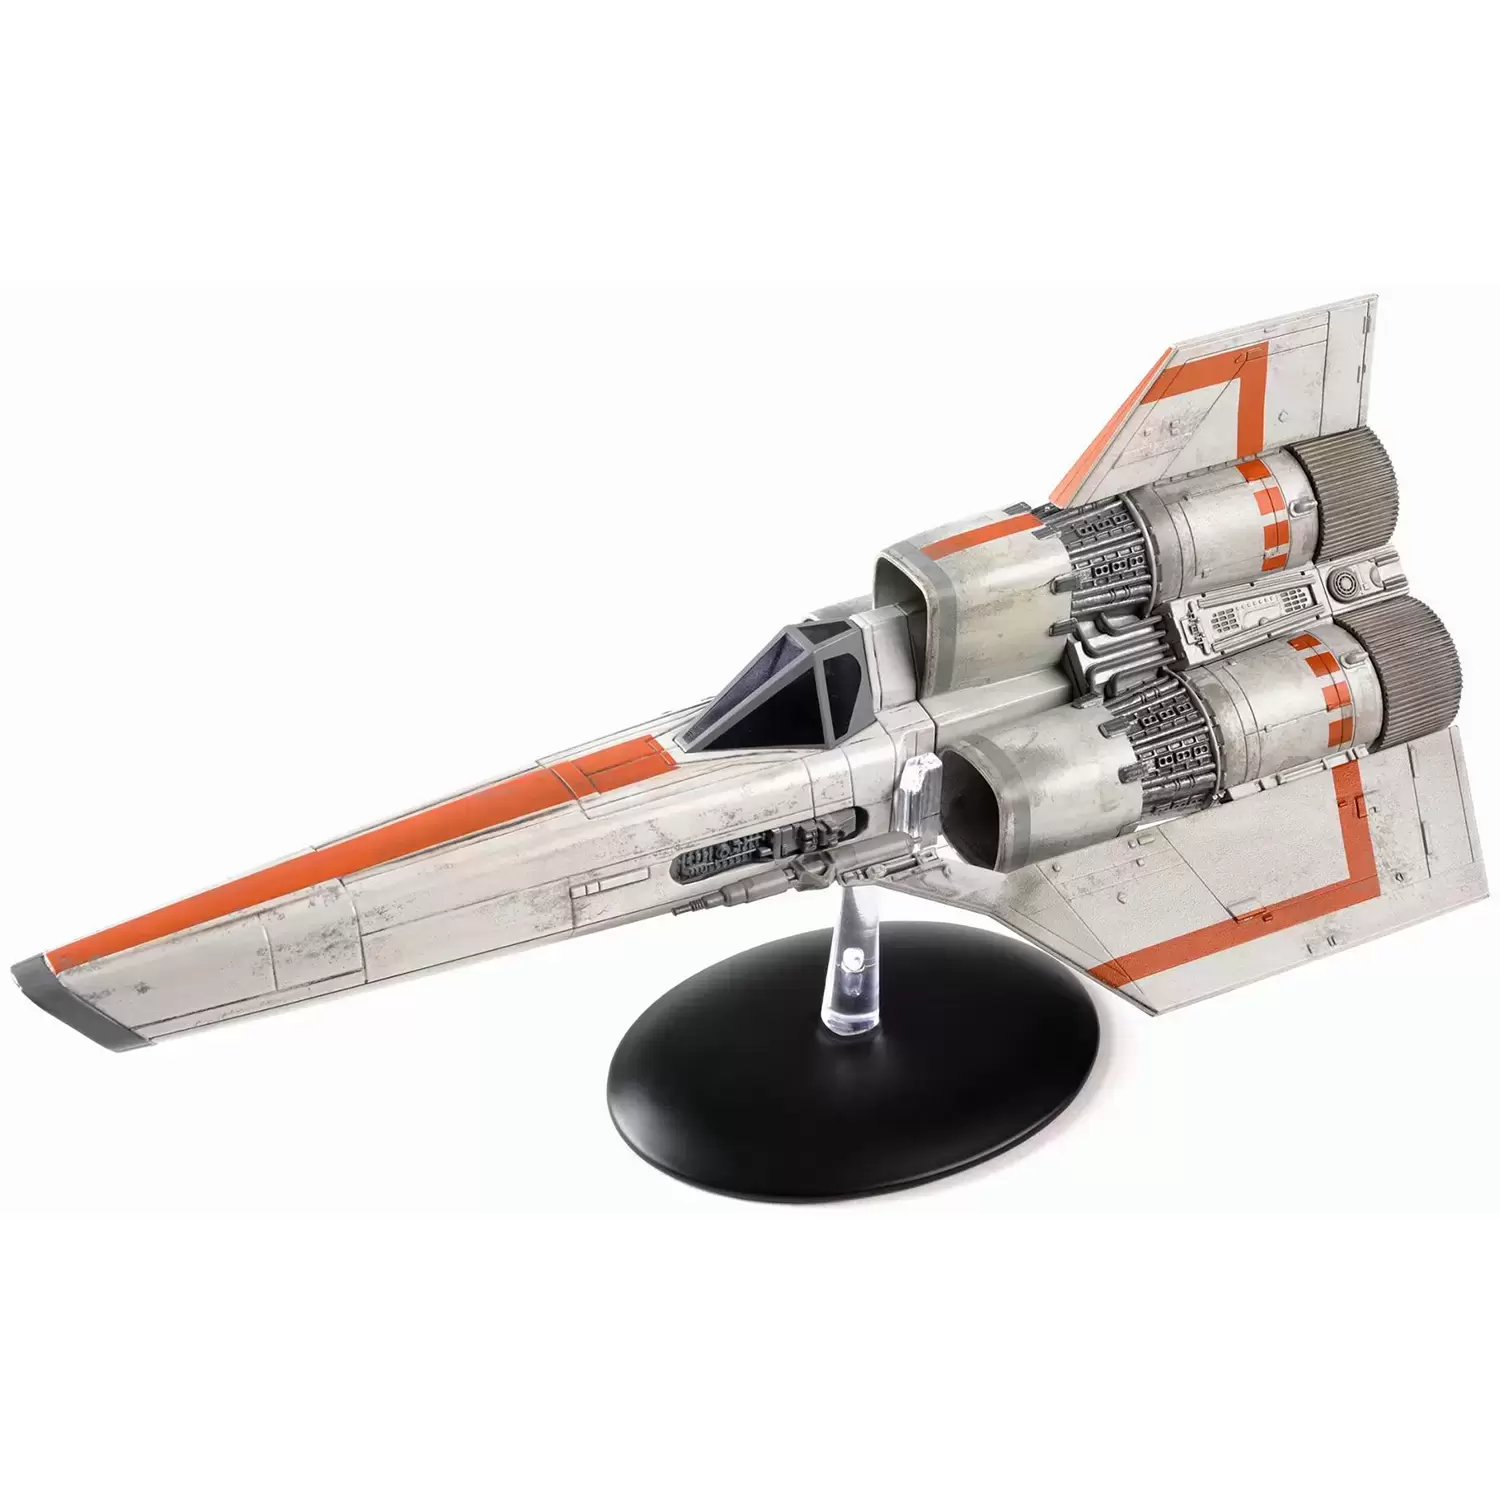 Battlestar Galactica - The Official Ships Collection - Viper MK-I (Classic-1978)